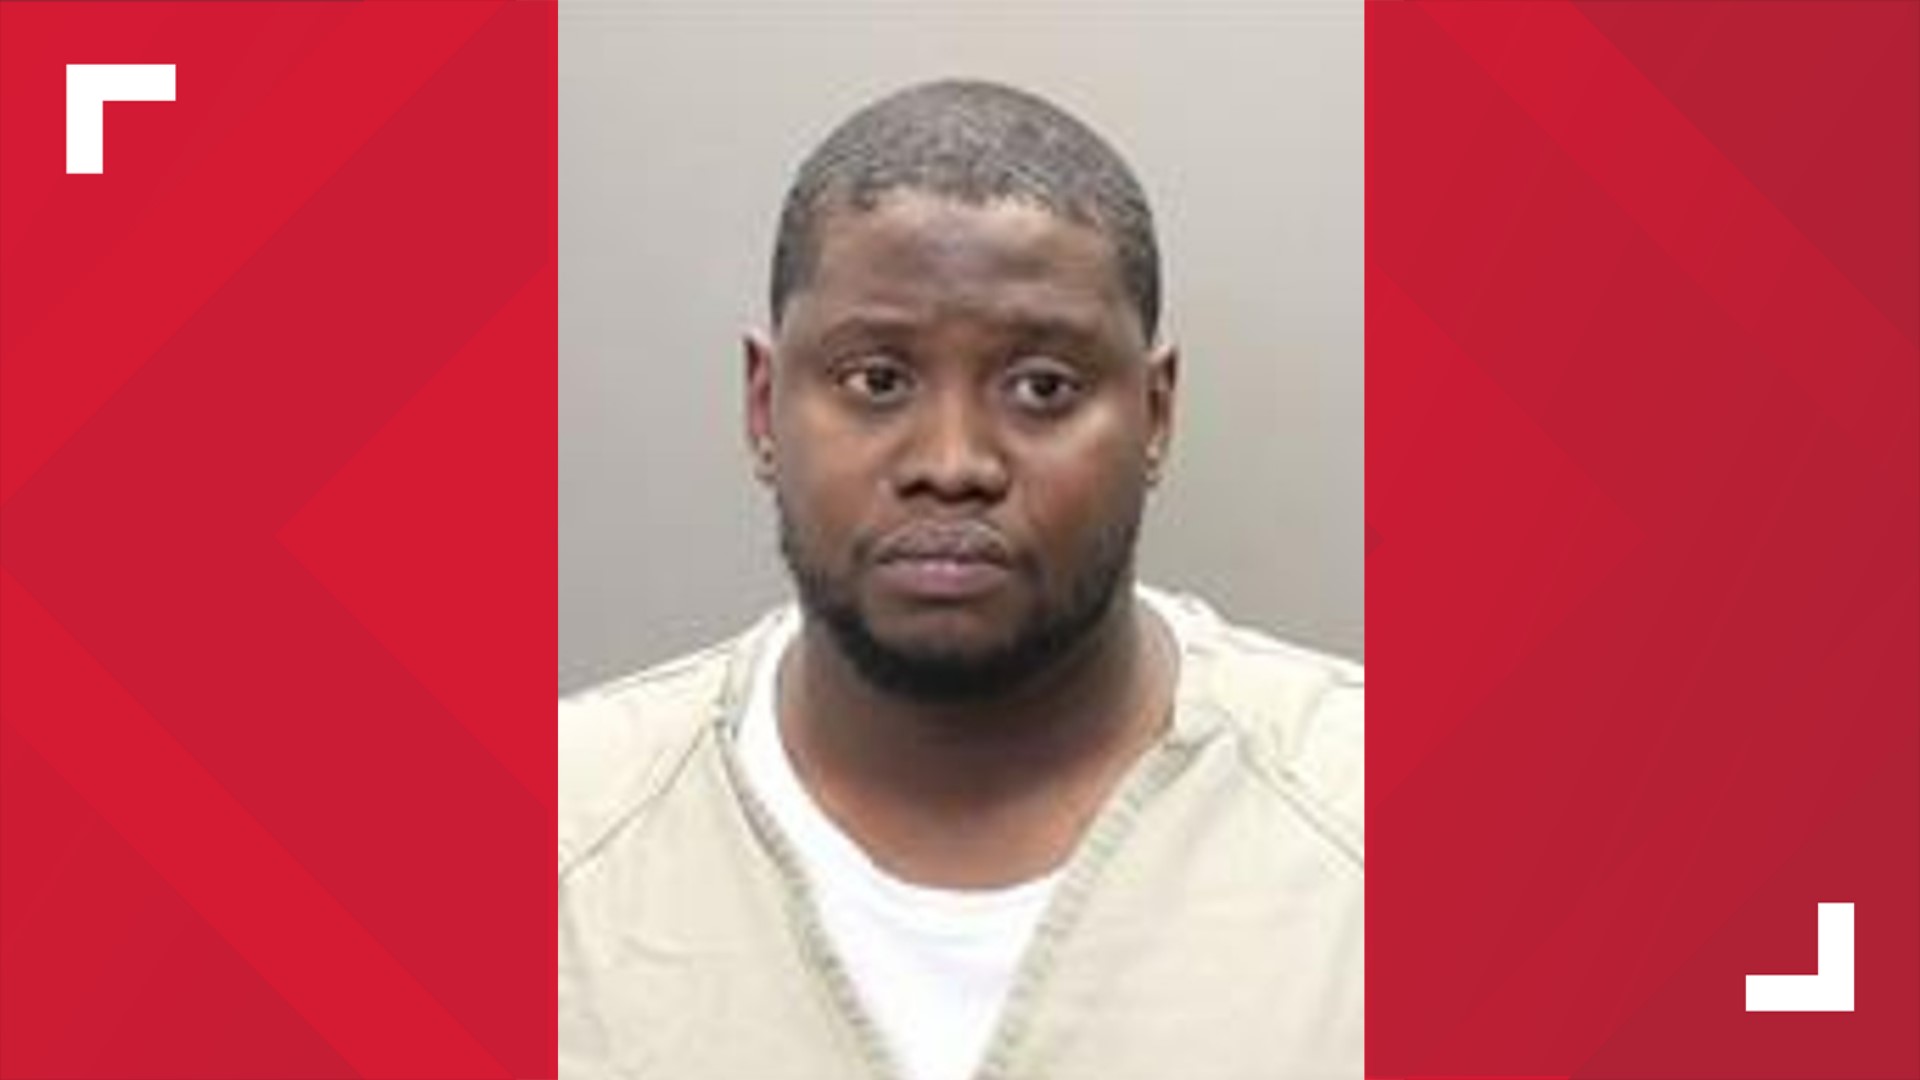 Gayelon Spencer Jr., who is charged with second-degree murder, is being held in the Franklin County jail until he is extradited to Michigan.